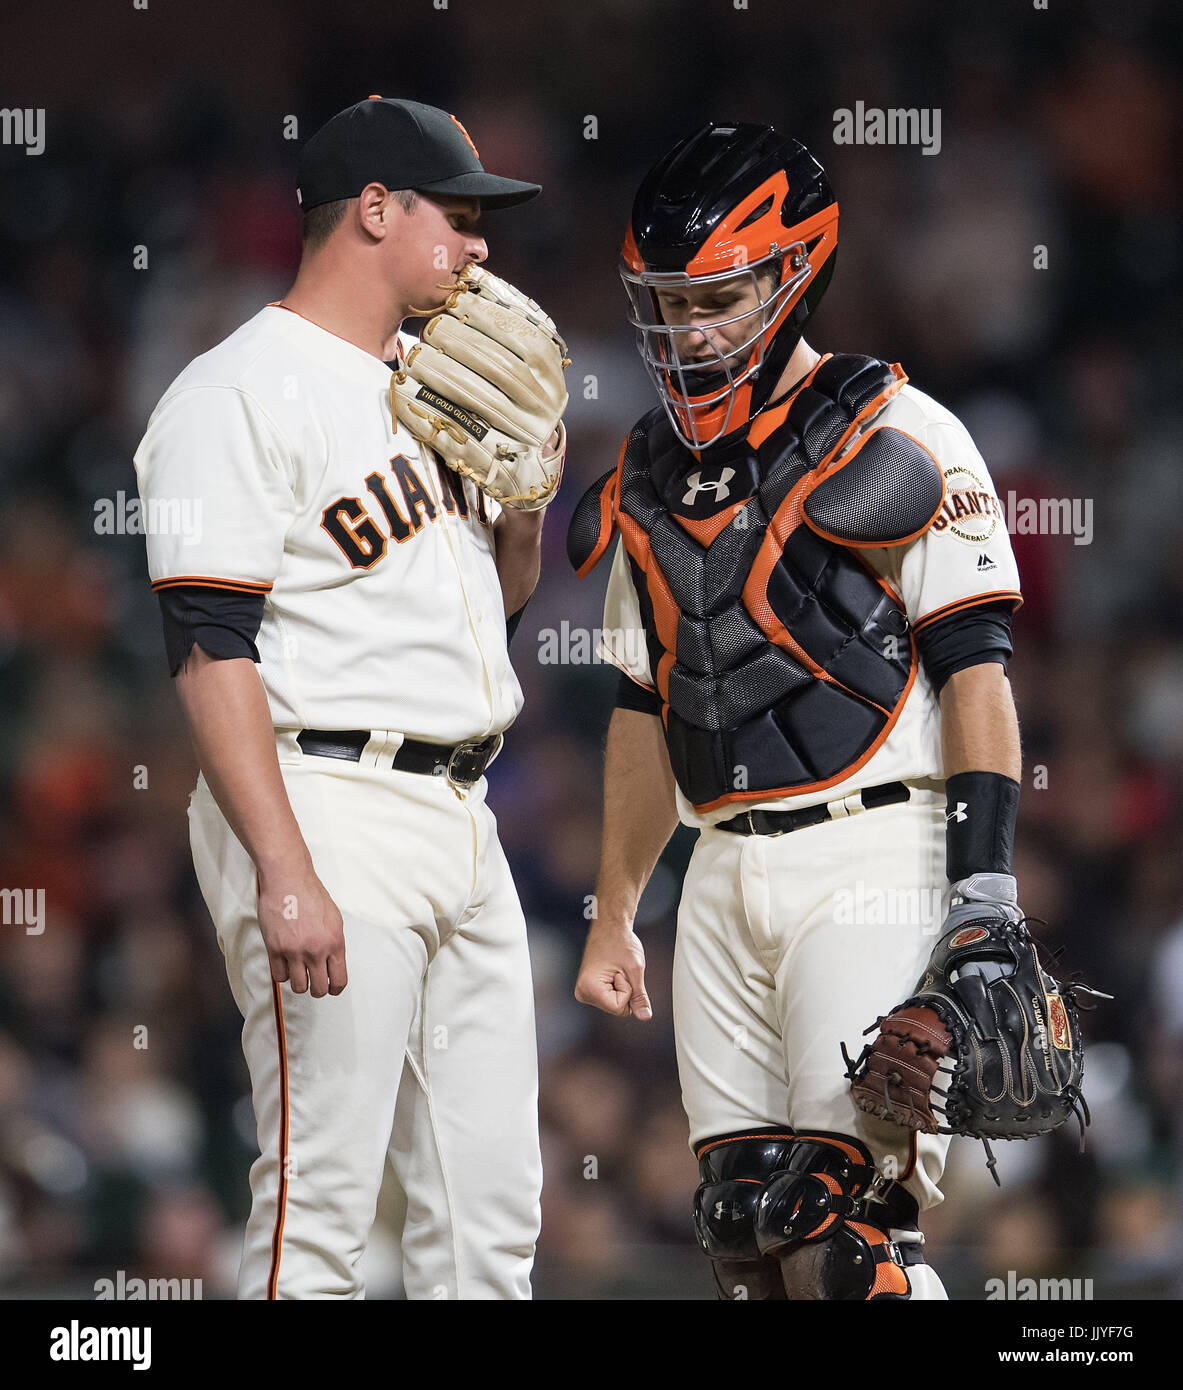 San Francisco, California, USA. 20th July, 2017. San Francisco Giants relief pitcher Kyle Crick (59) and catcher Buster Posey (28) have a quick talk on the mound, during a MLB game between the San Diego Padres and the San Francisco Giants at AT&T Park in San Francisco, California. Valerie Shoaps/CSM/Alamy Live News Stock Photo